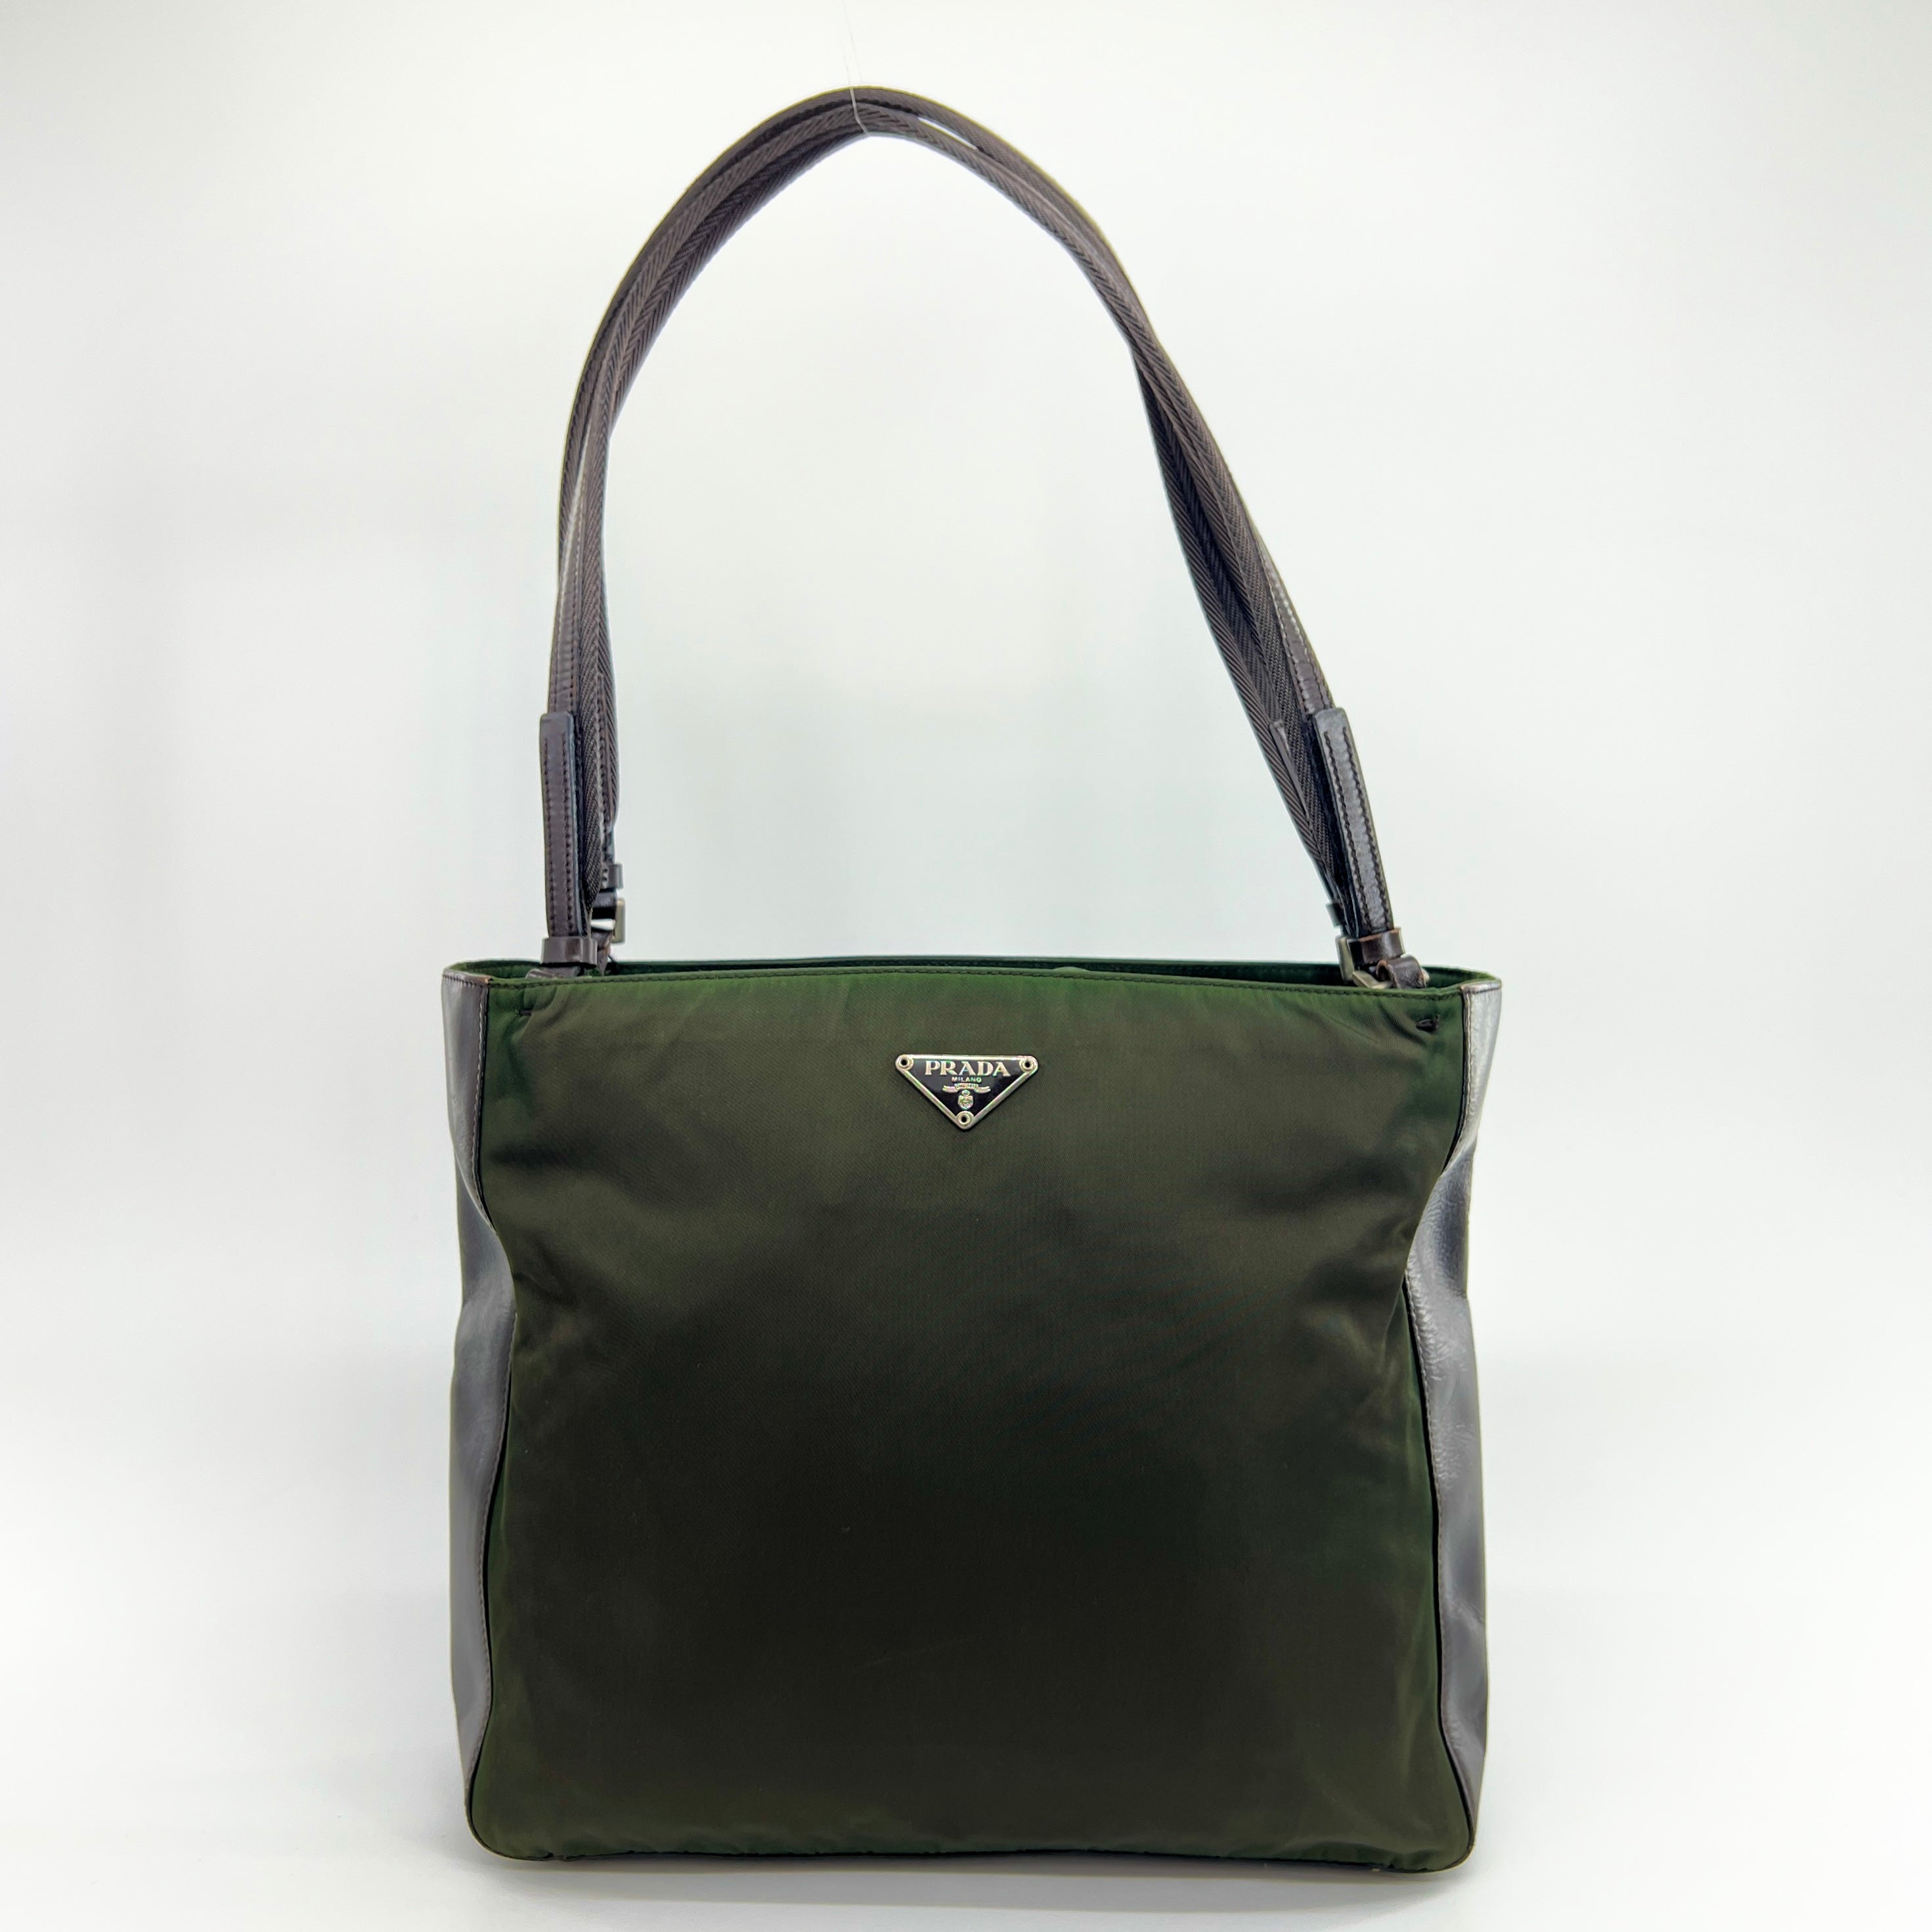 Nylon Leather Tote Small Shoulder Bag Green Brown - Vintage Luxuries